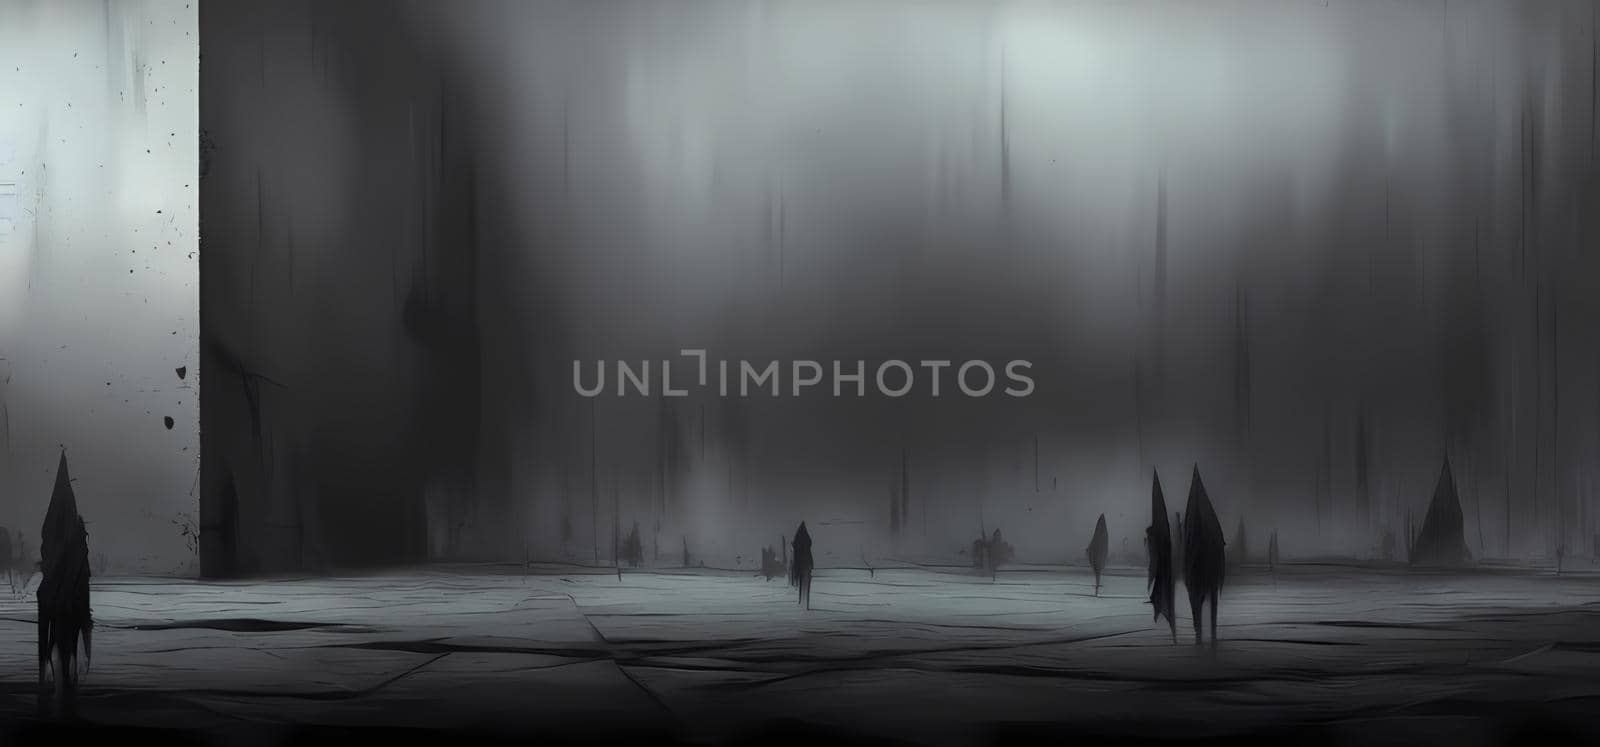 Abstract conceptual art of people empty life, living in the vast large area. Digital art painting for book illustration,background wallpaper, concept art.